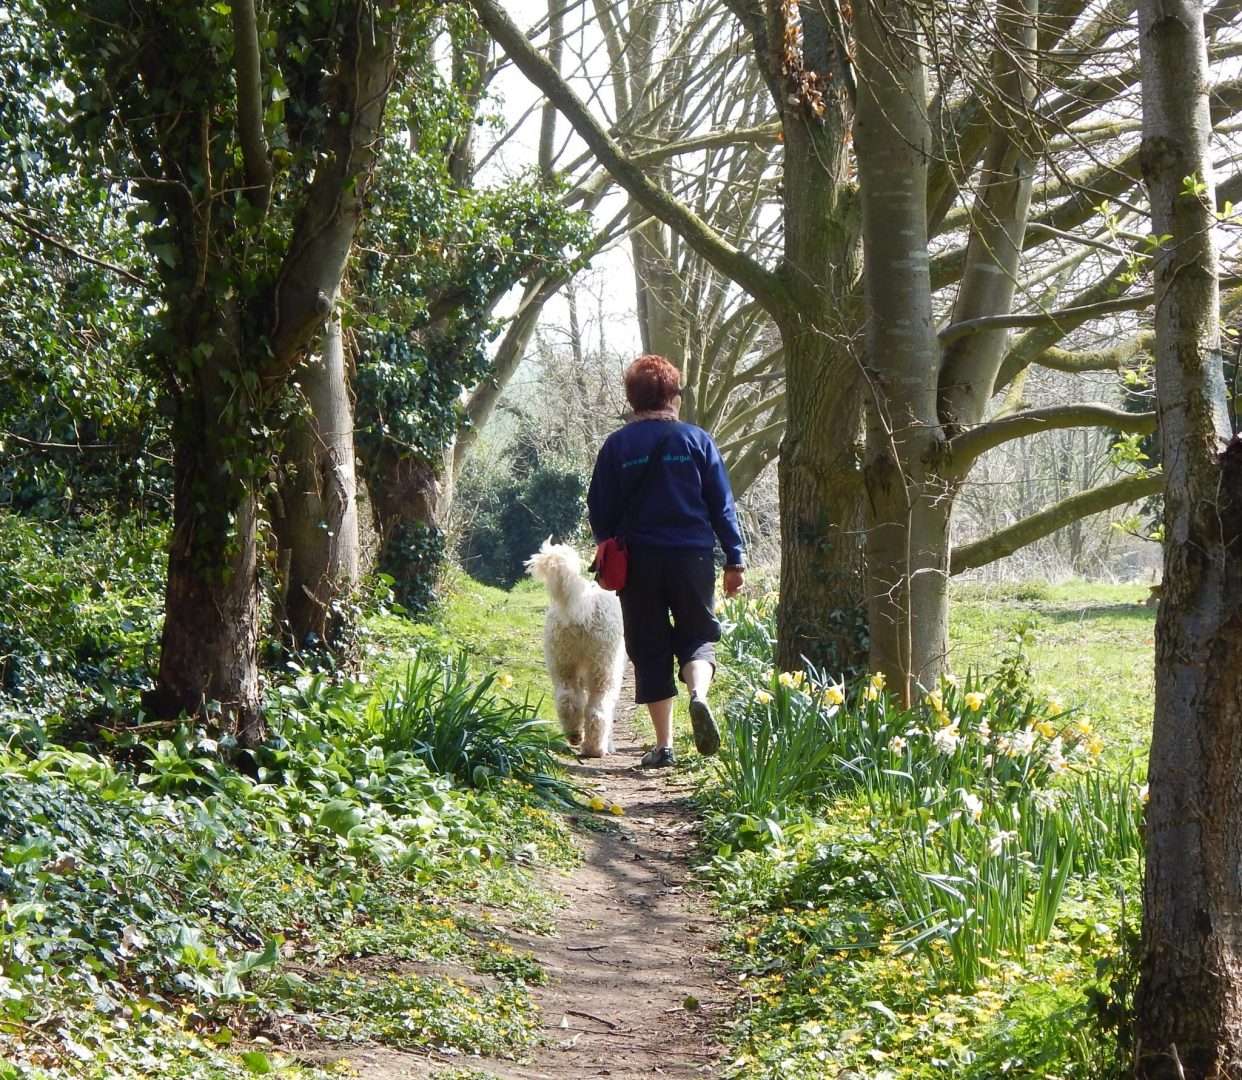 A woman walks a white dog along a narrow wooded path flanked with daffodils